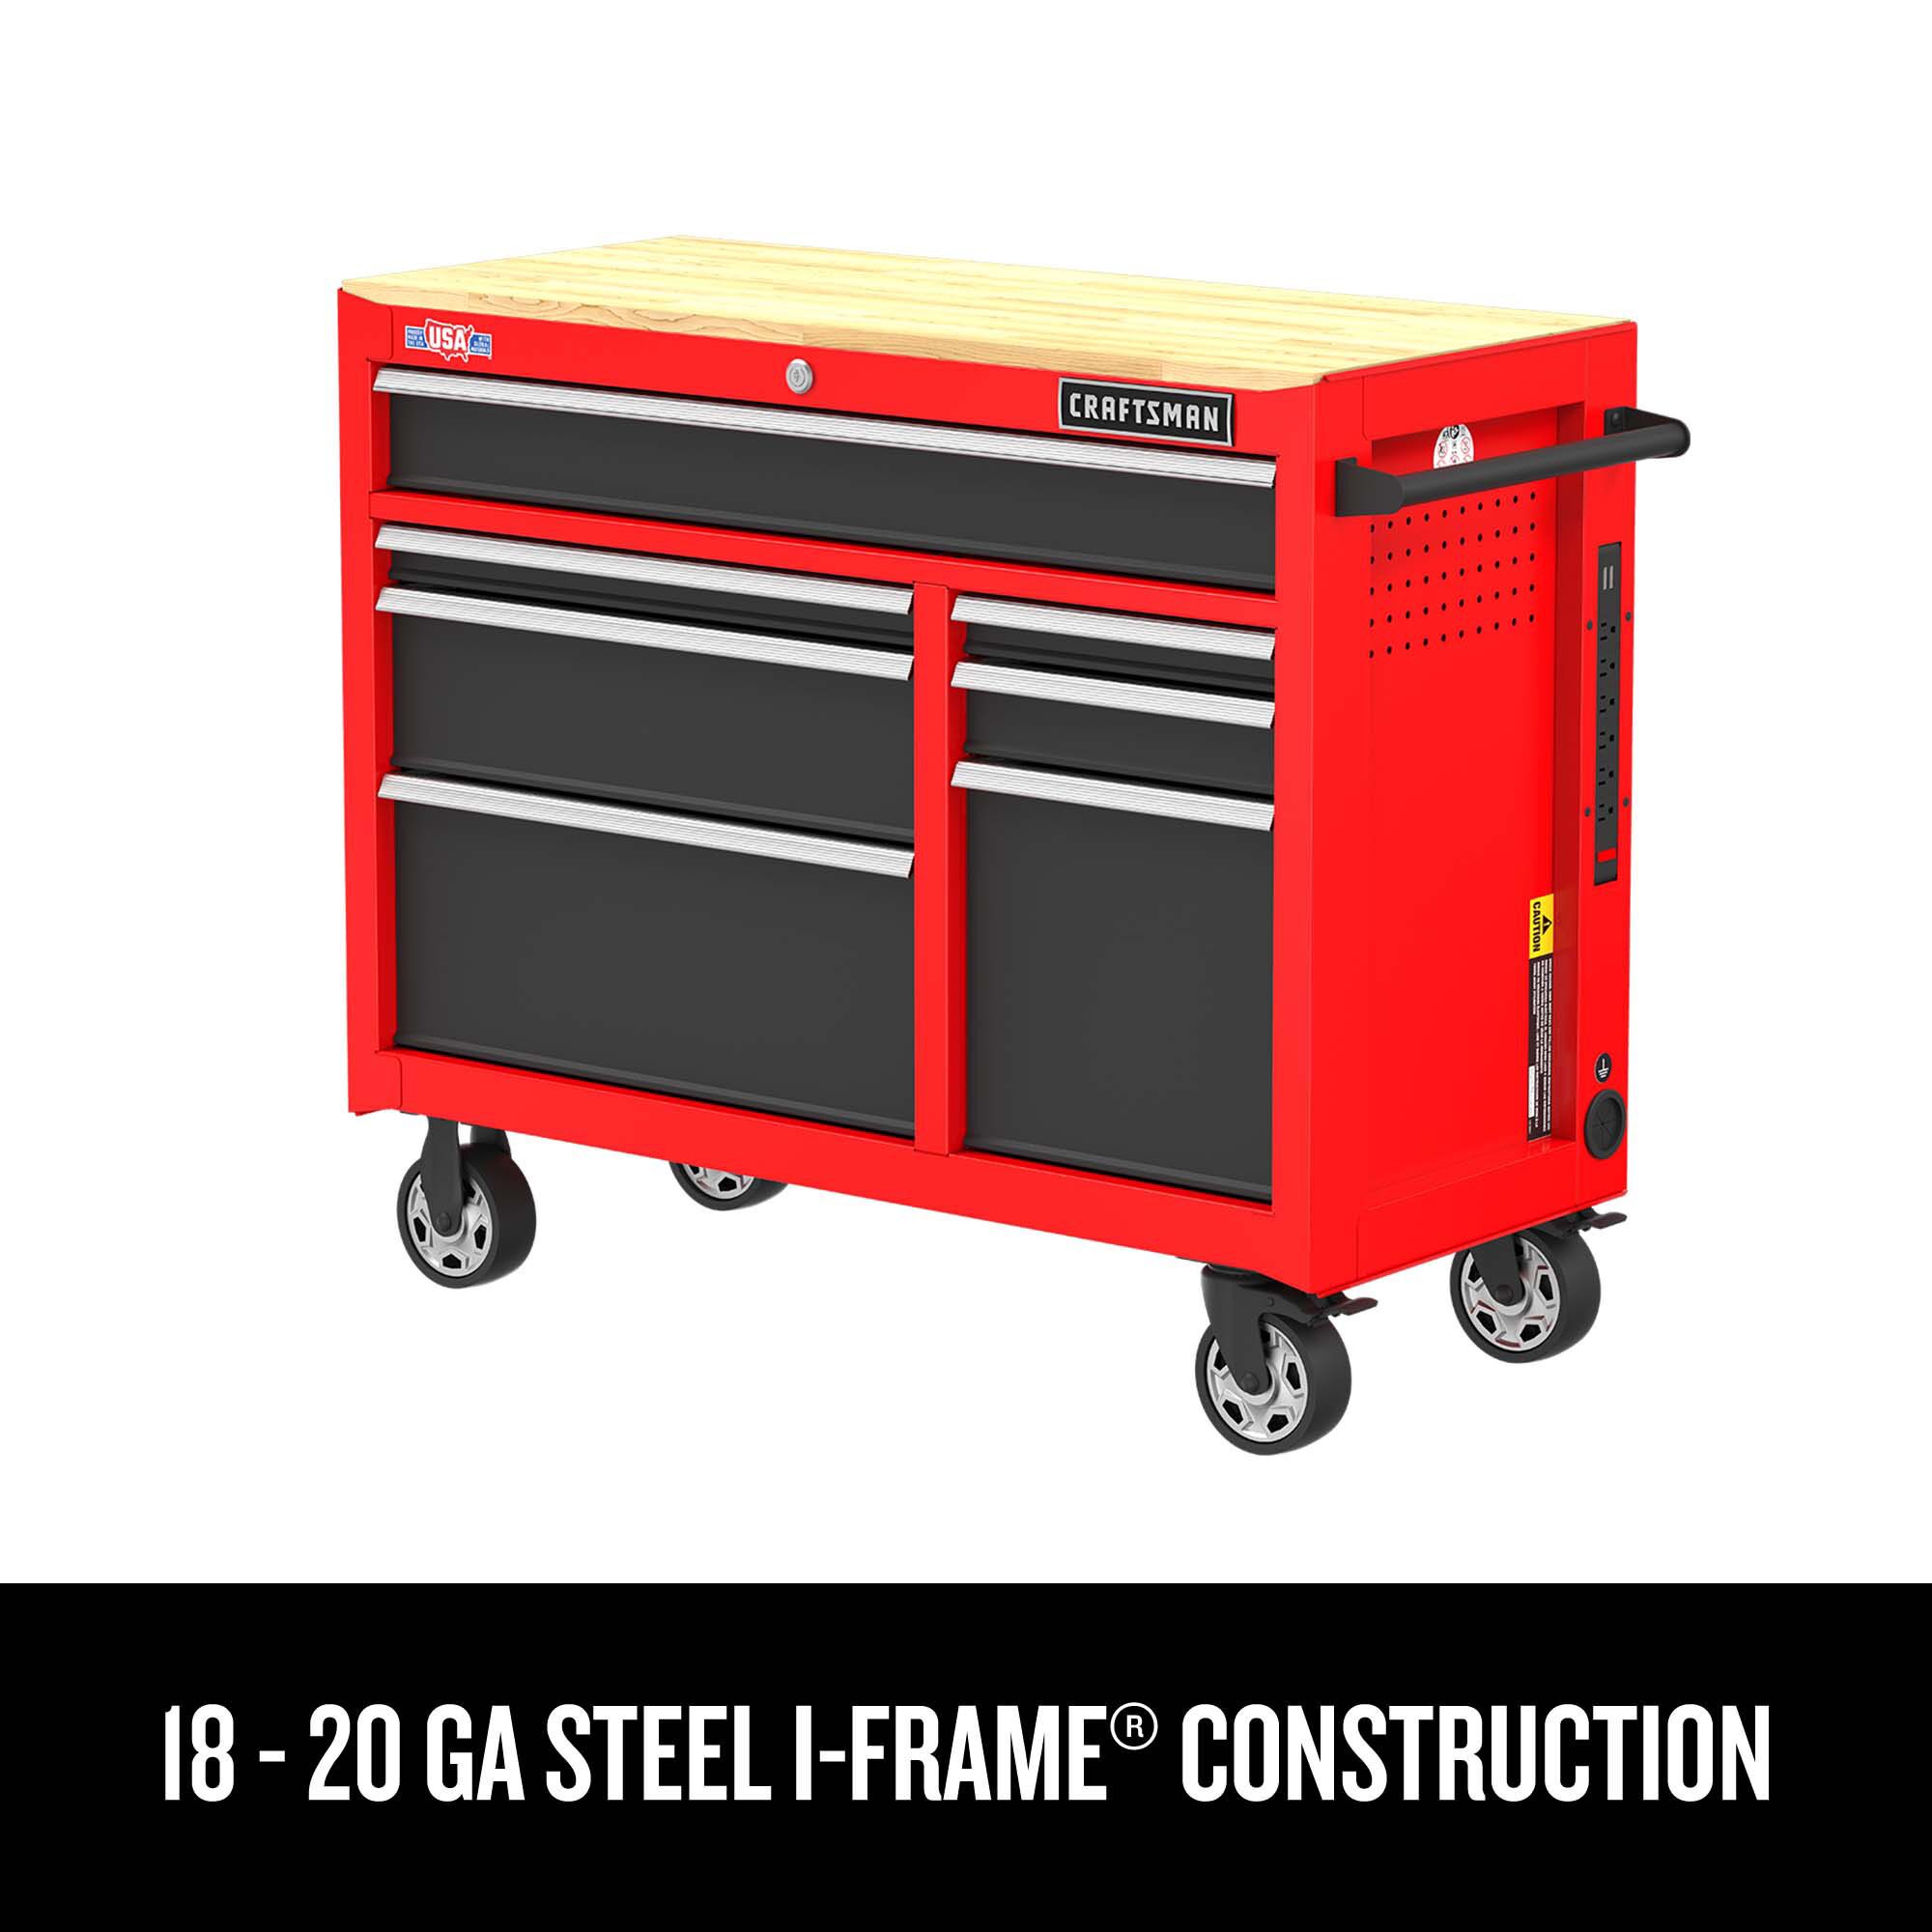 Black and Decker Constructor 7 Models in 1 Set - RED TOOL BOX